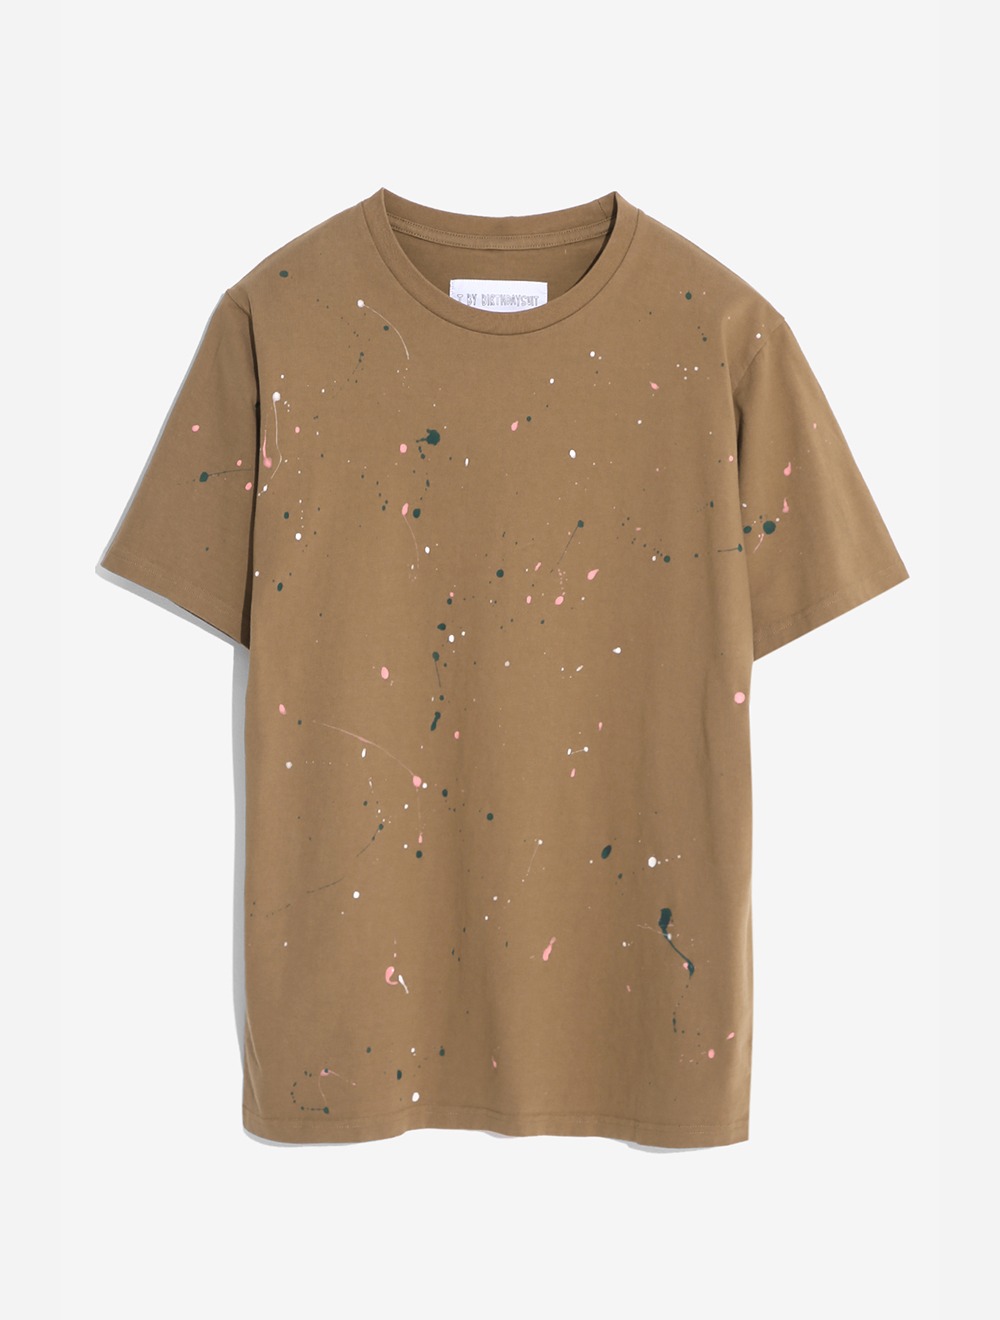 PAINTED T-SHIRT (BROWN)